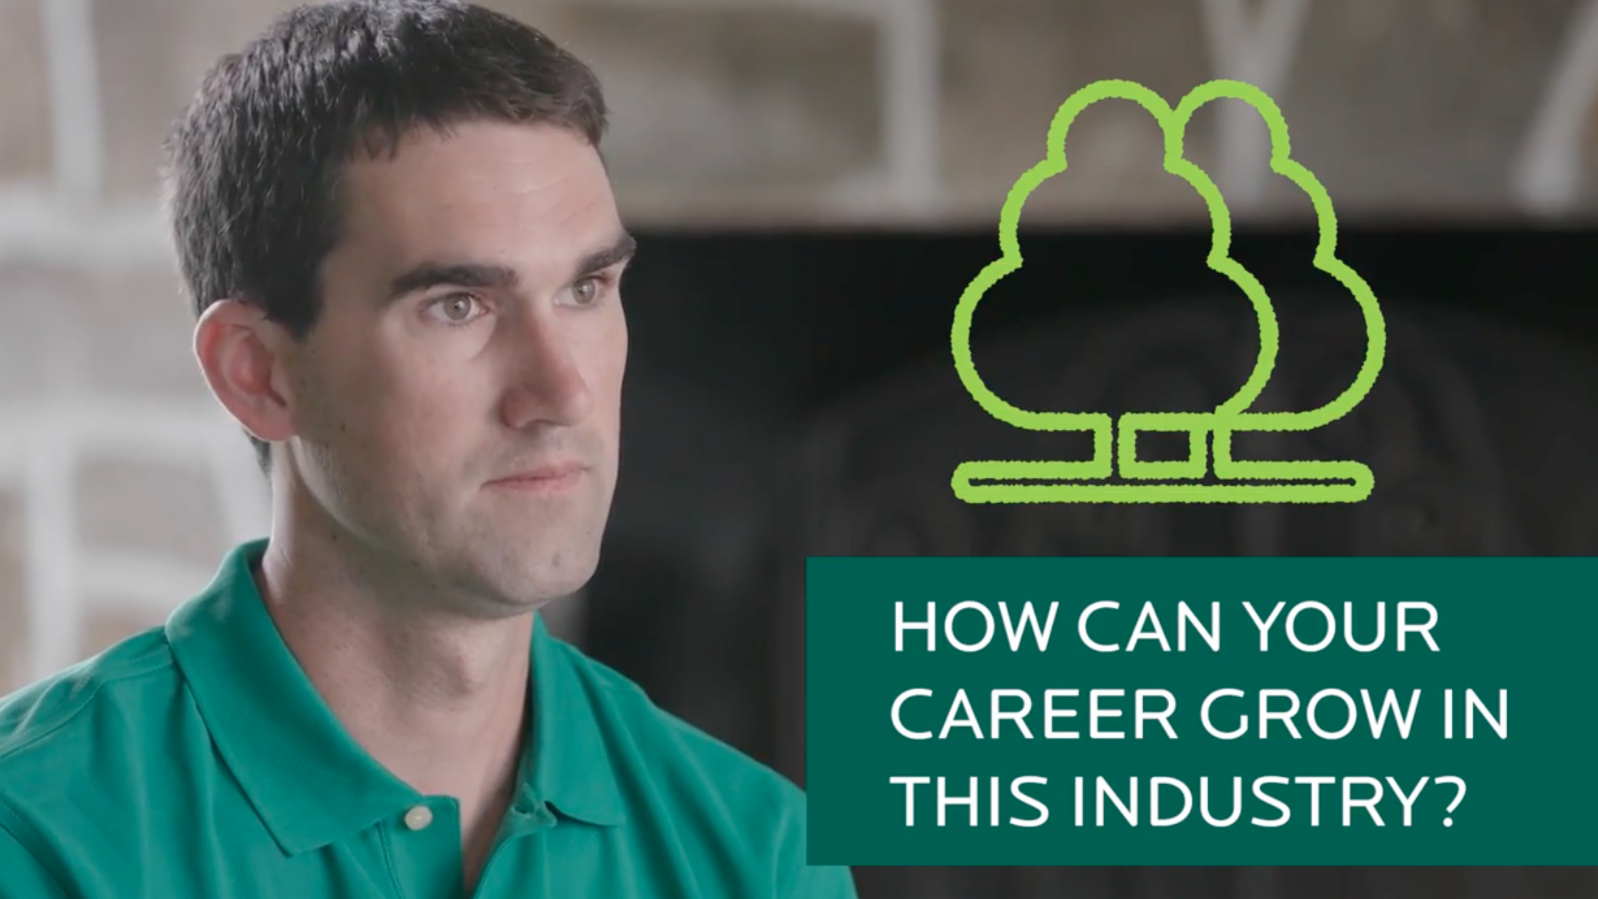 How Can Your Career Grow in the Landscape Industry? - Landscape Career Videos